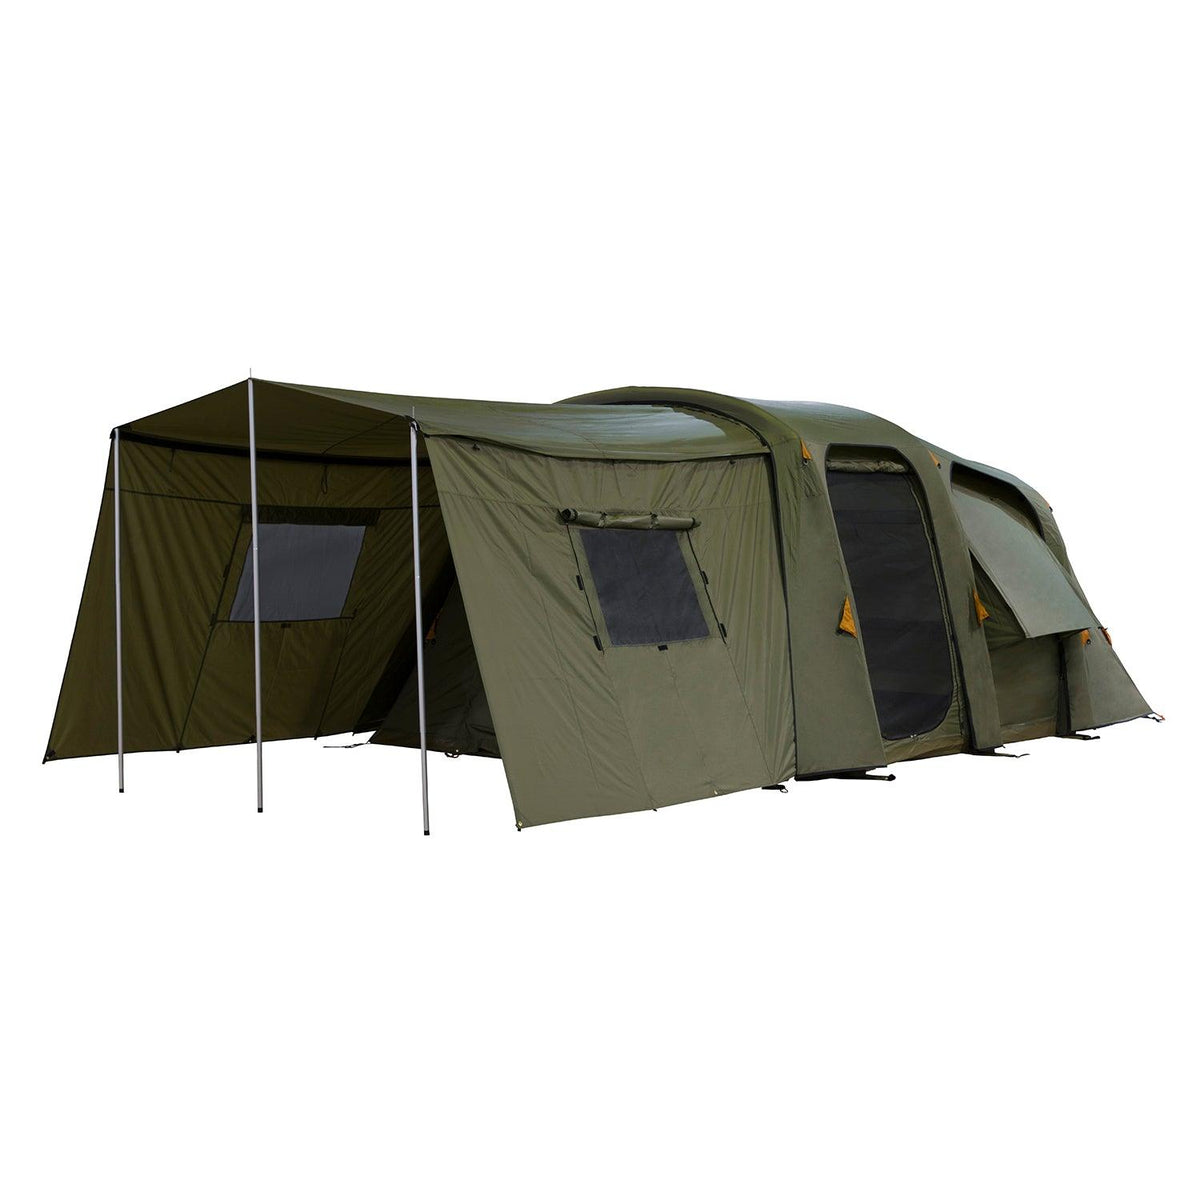 Air-Volution Wall Kit AIR-VOLUTION WALL KIT AIR VOLUTION WALL KIT GREEN Shelters Darche- Overland Kitted